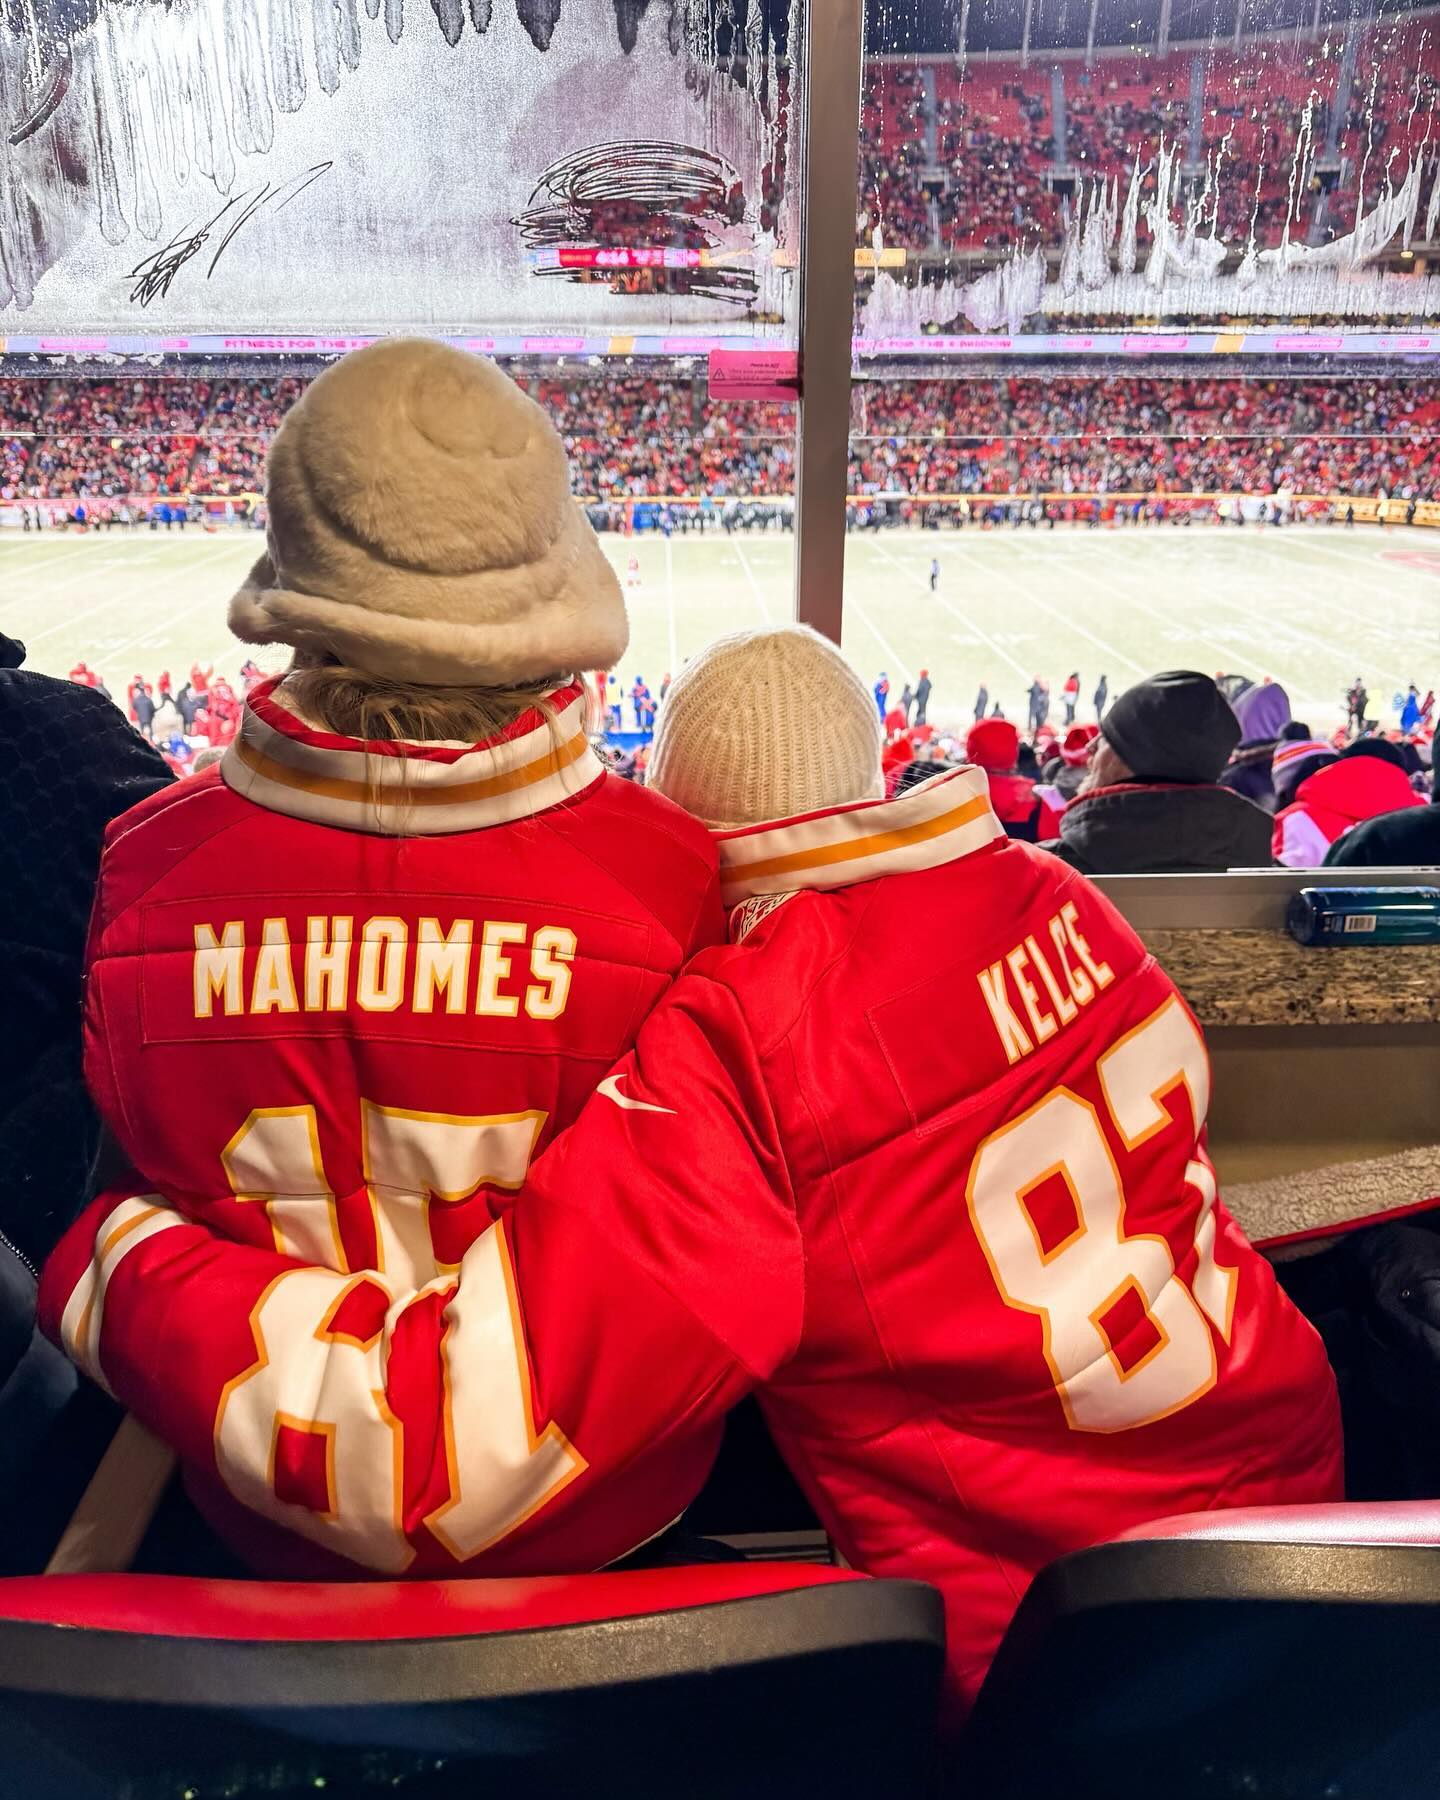 Some people believe Taylor's presence at the Chiefs games may be starting to irritate NFL fans